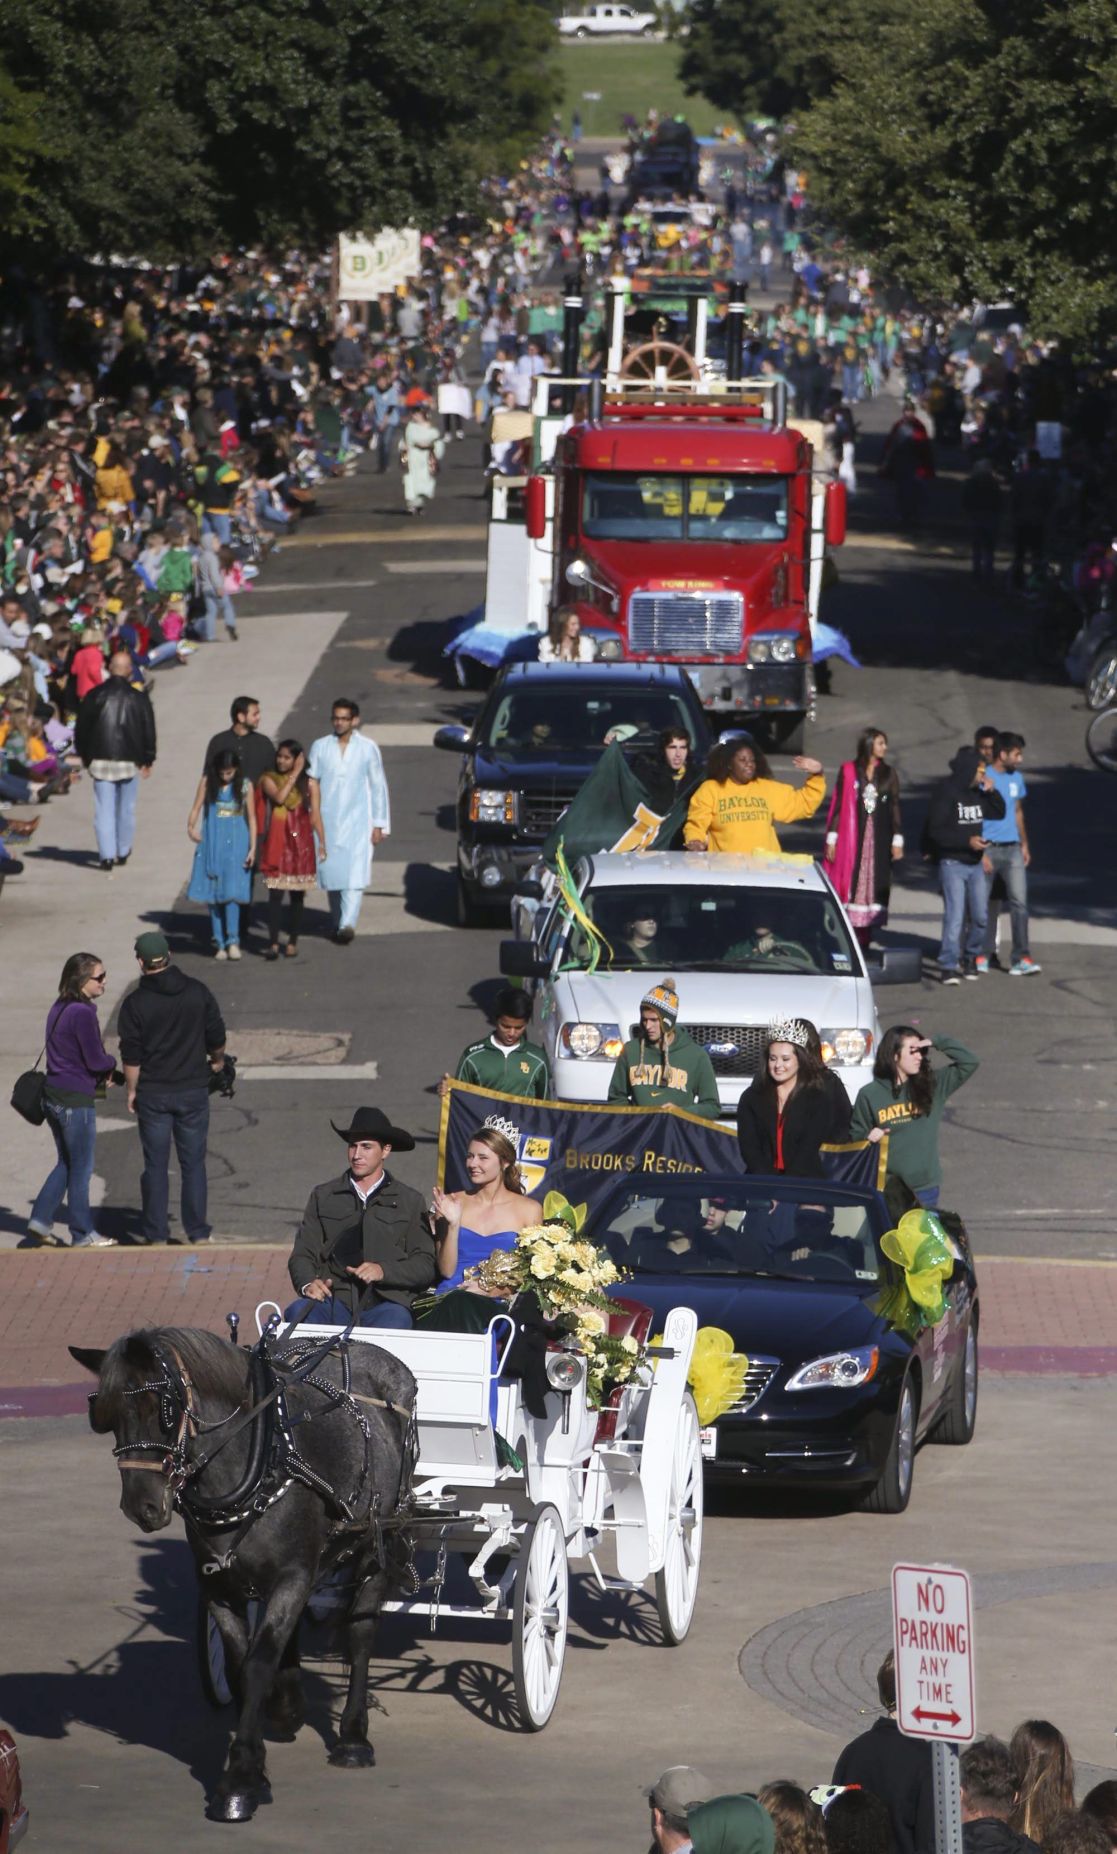 Baylor bearly changes with familiar parade, traditions